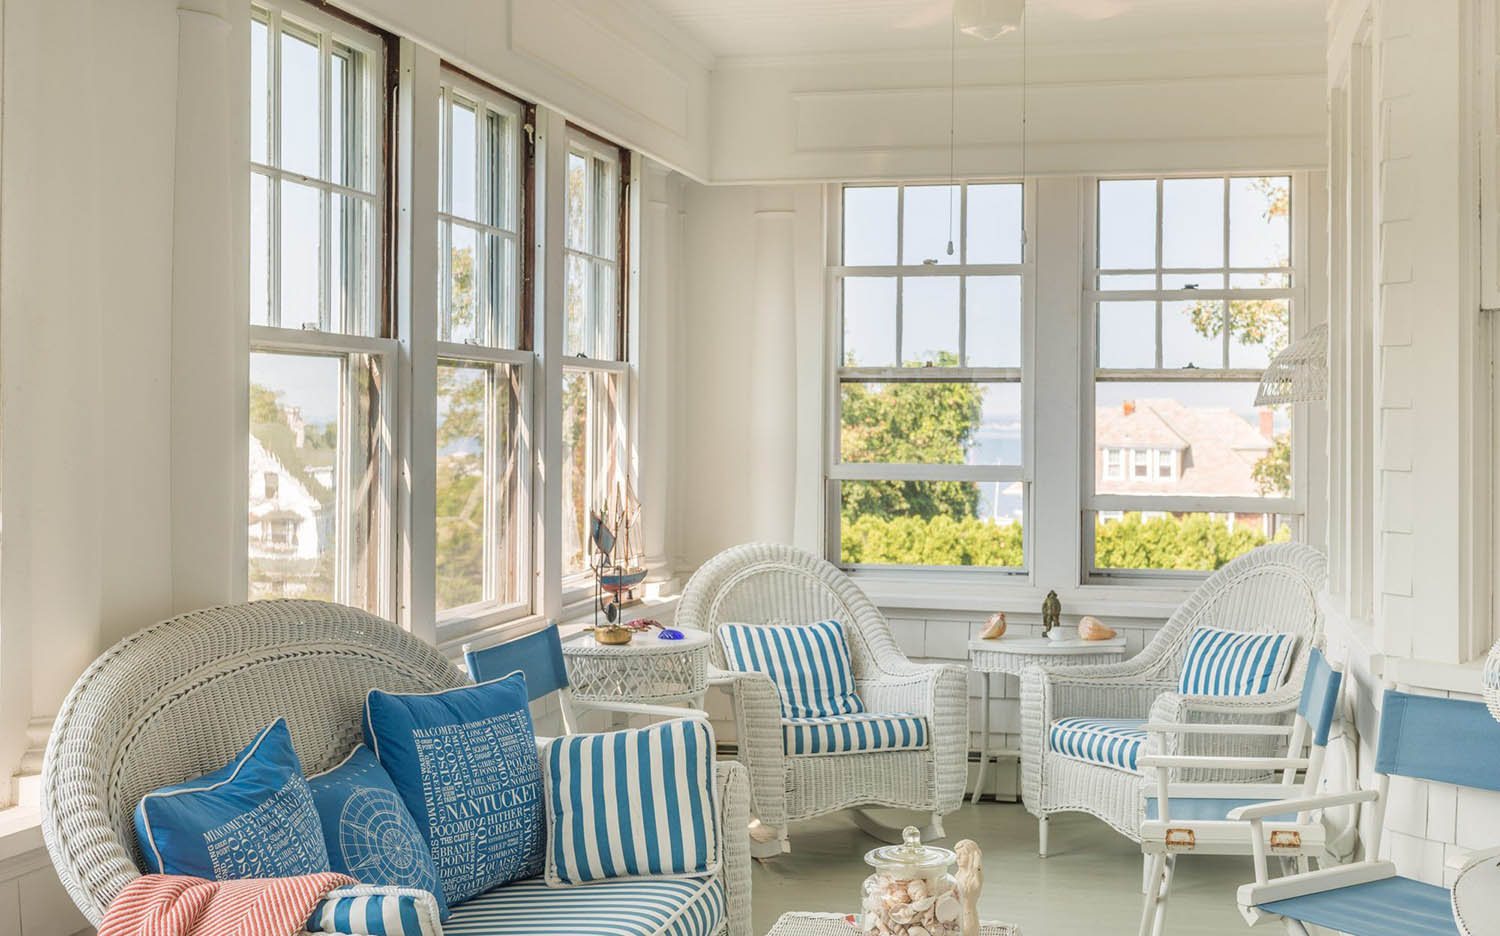 beautiful all white sunroom with white wicker furniture and blue and white cushions